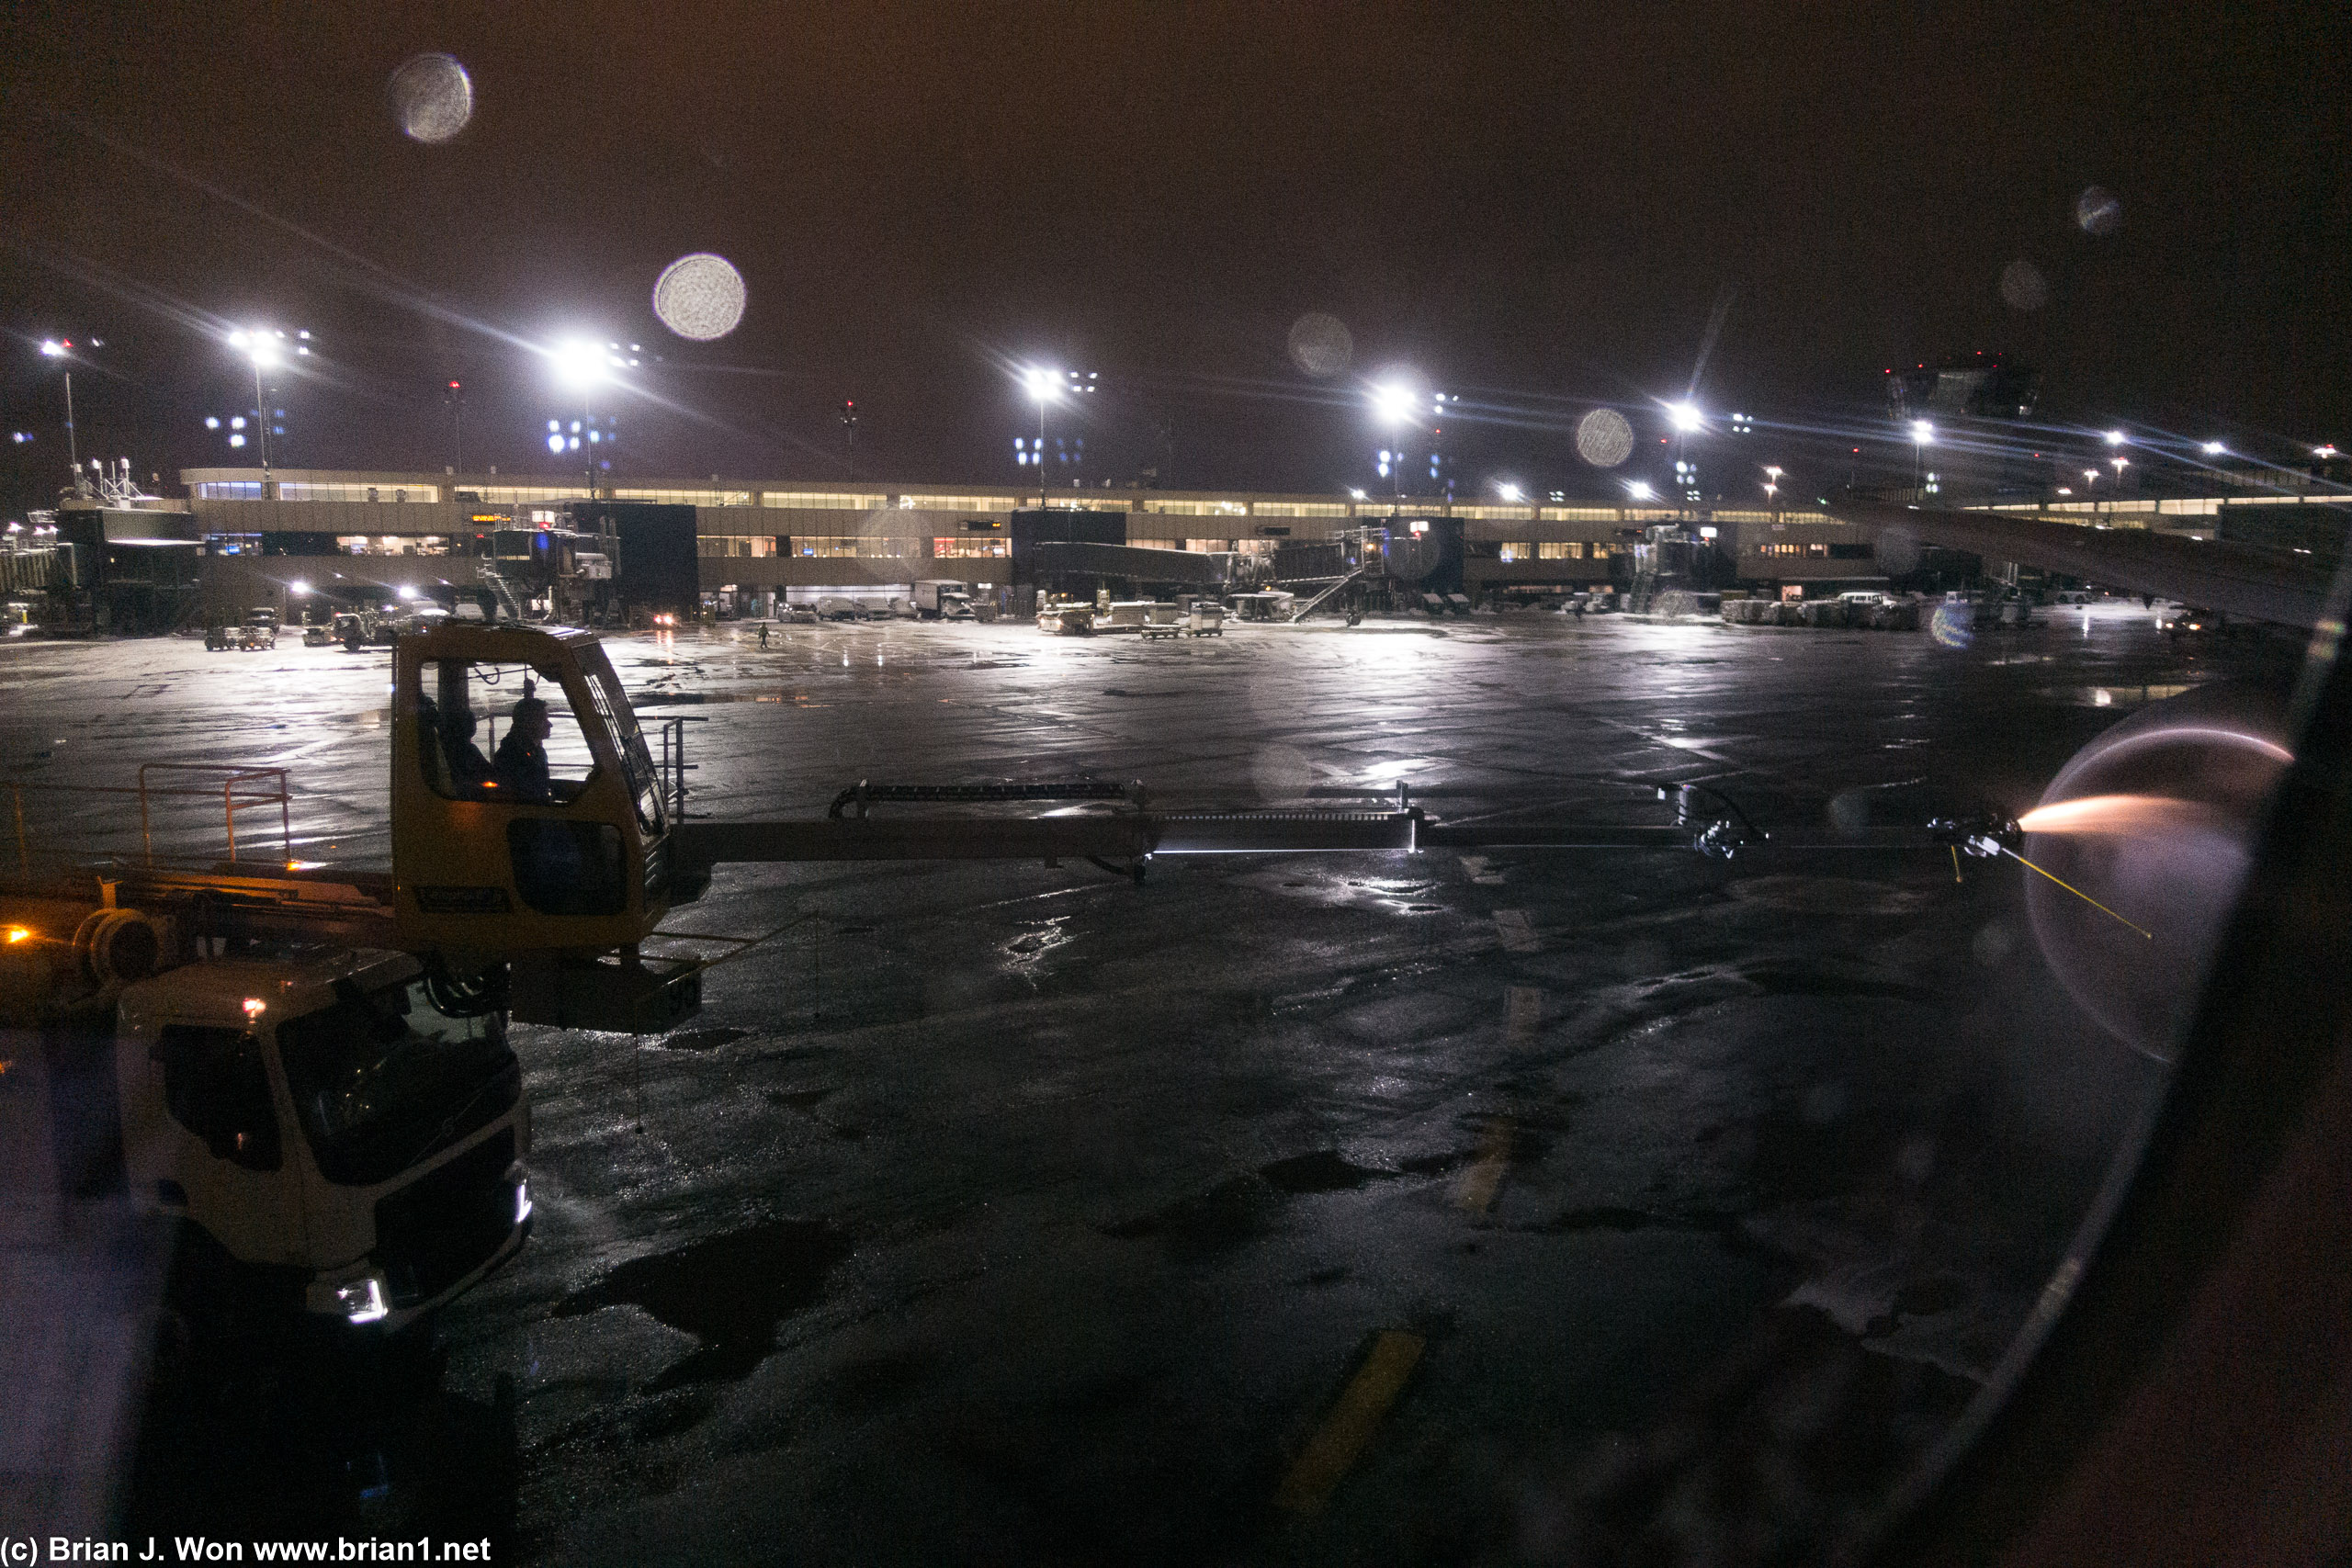 De-icing the engines at the gate.